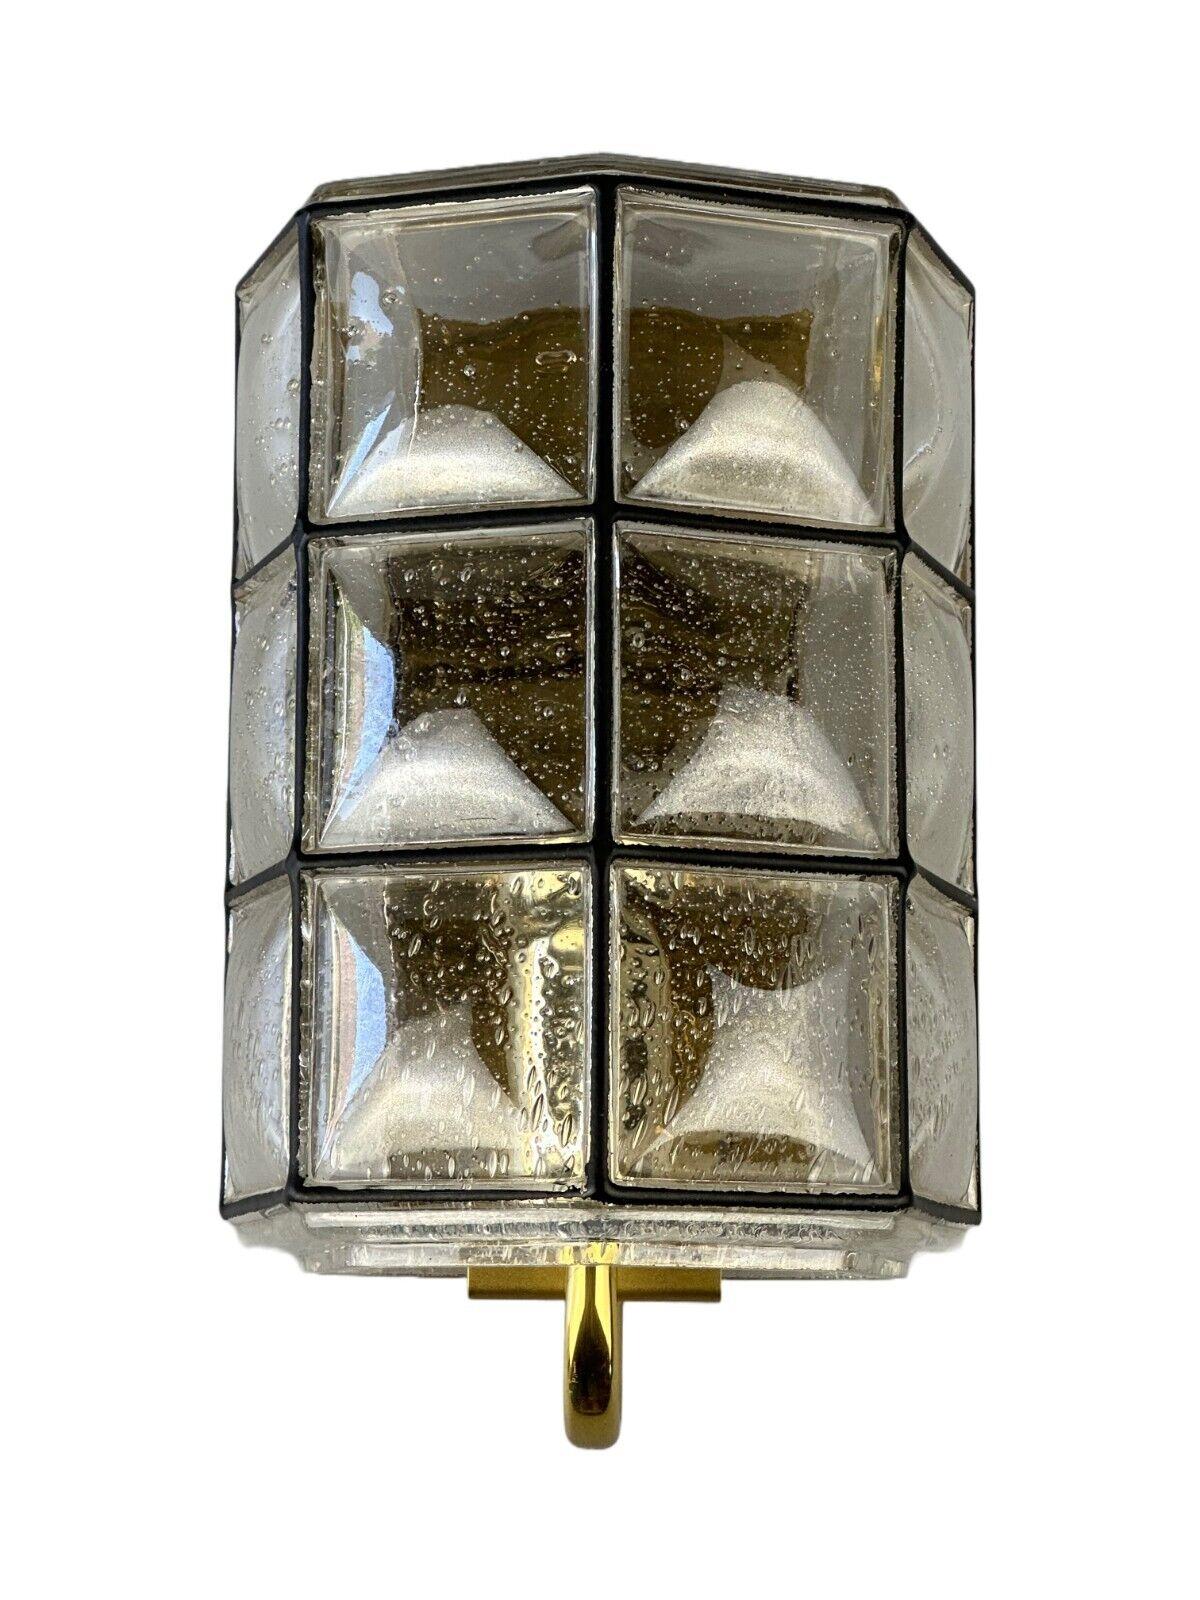 60s 70s lamp light wall lamp wall light Limburg Space Age Design 60s

Object: wall lamp

Manufacturer: Glashütte Limburg

Condition: good

Age: around 1960-1970

Dimensions:

Width = 15cm
Depth = 12cm
Height = 23.5cm

Other notes:

E14 socket

The